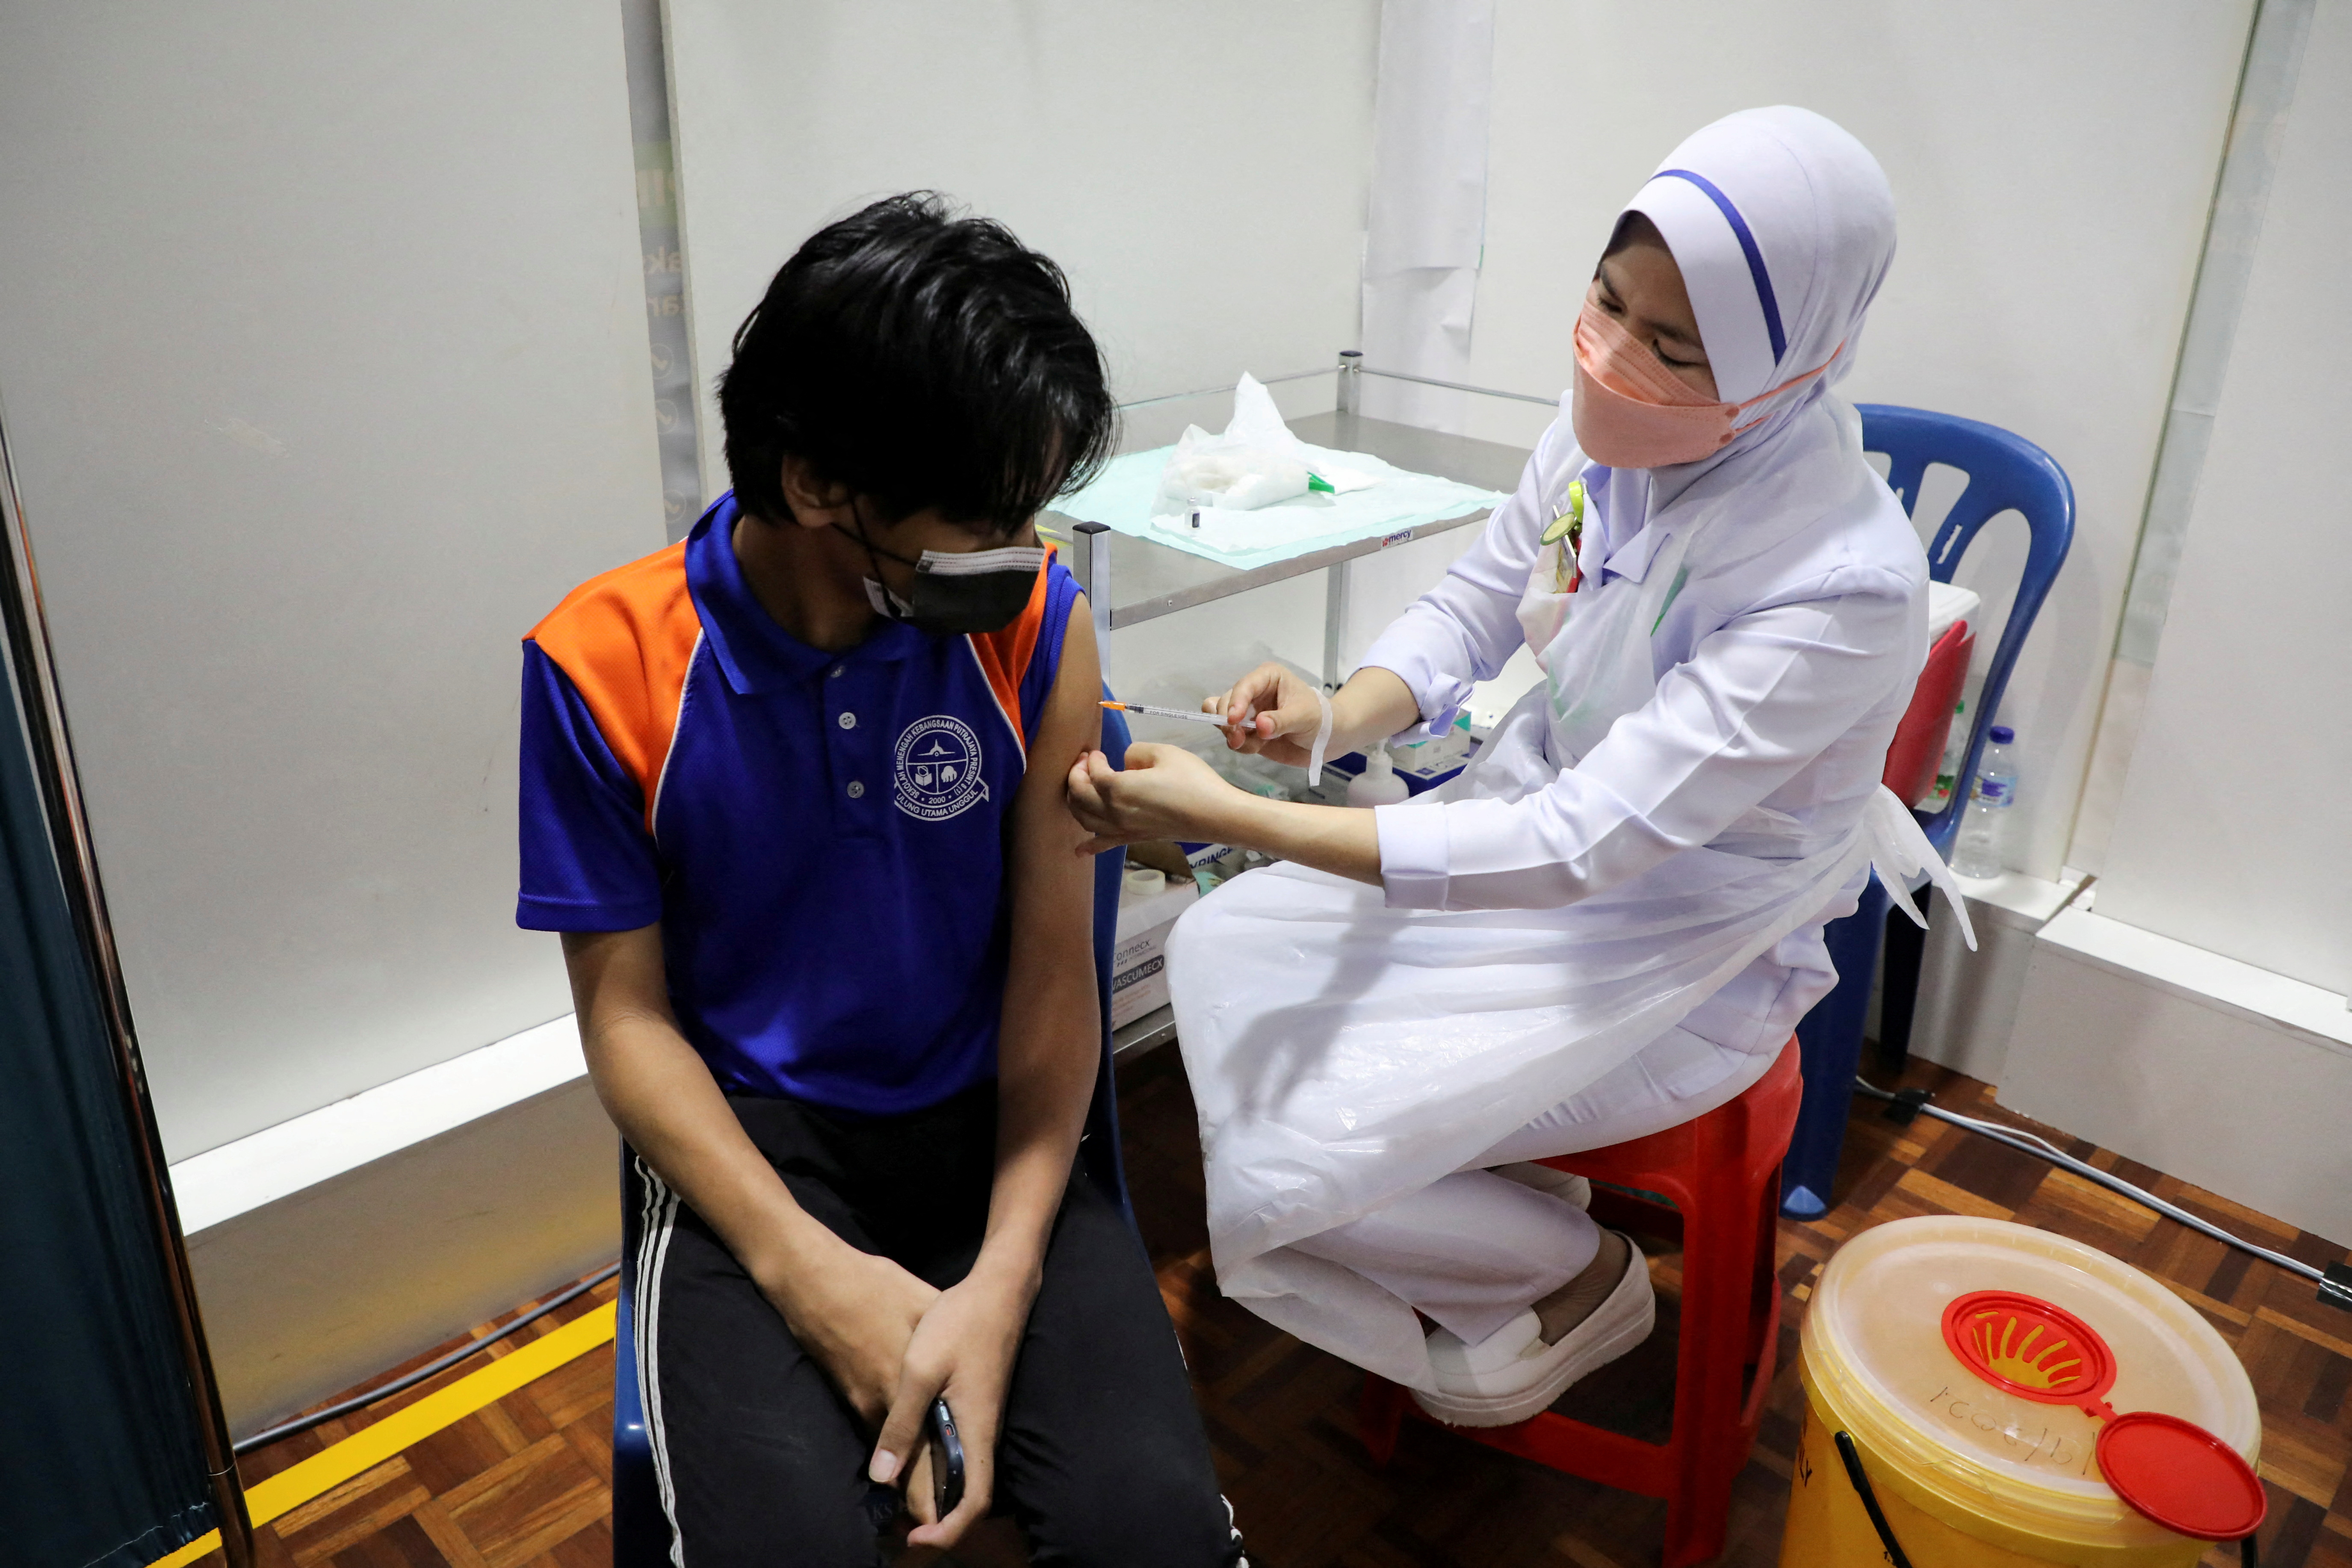 Secondary school student receives a dose of the Pfizer vaccine against the coronavirus disease (COVID-19) at a school, in Putrajaya